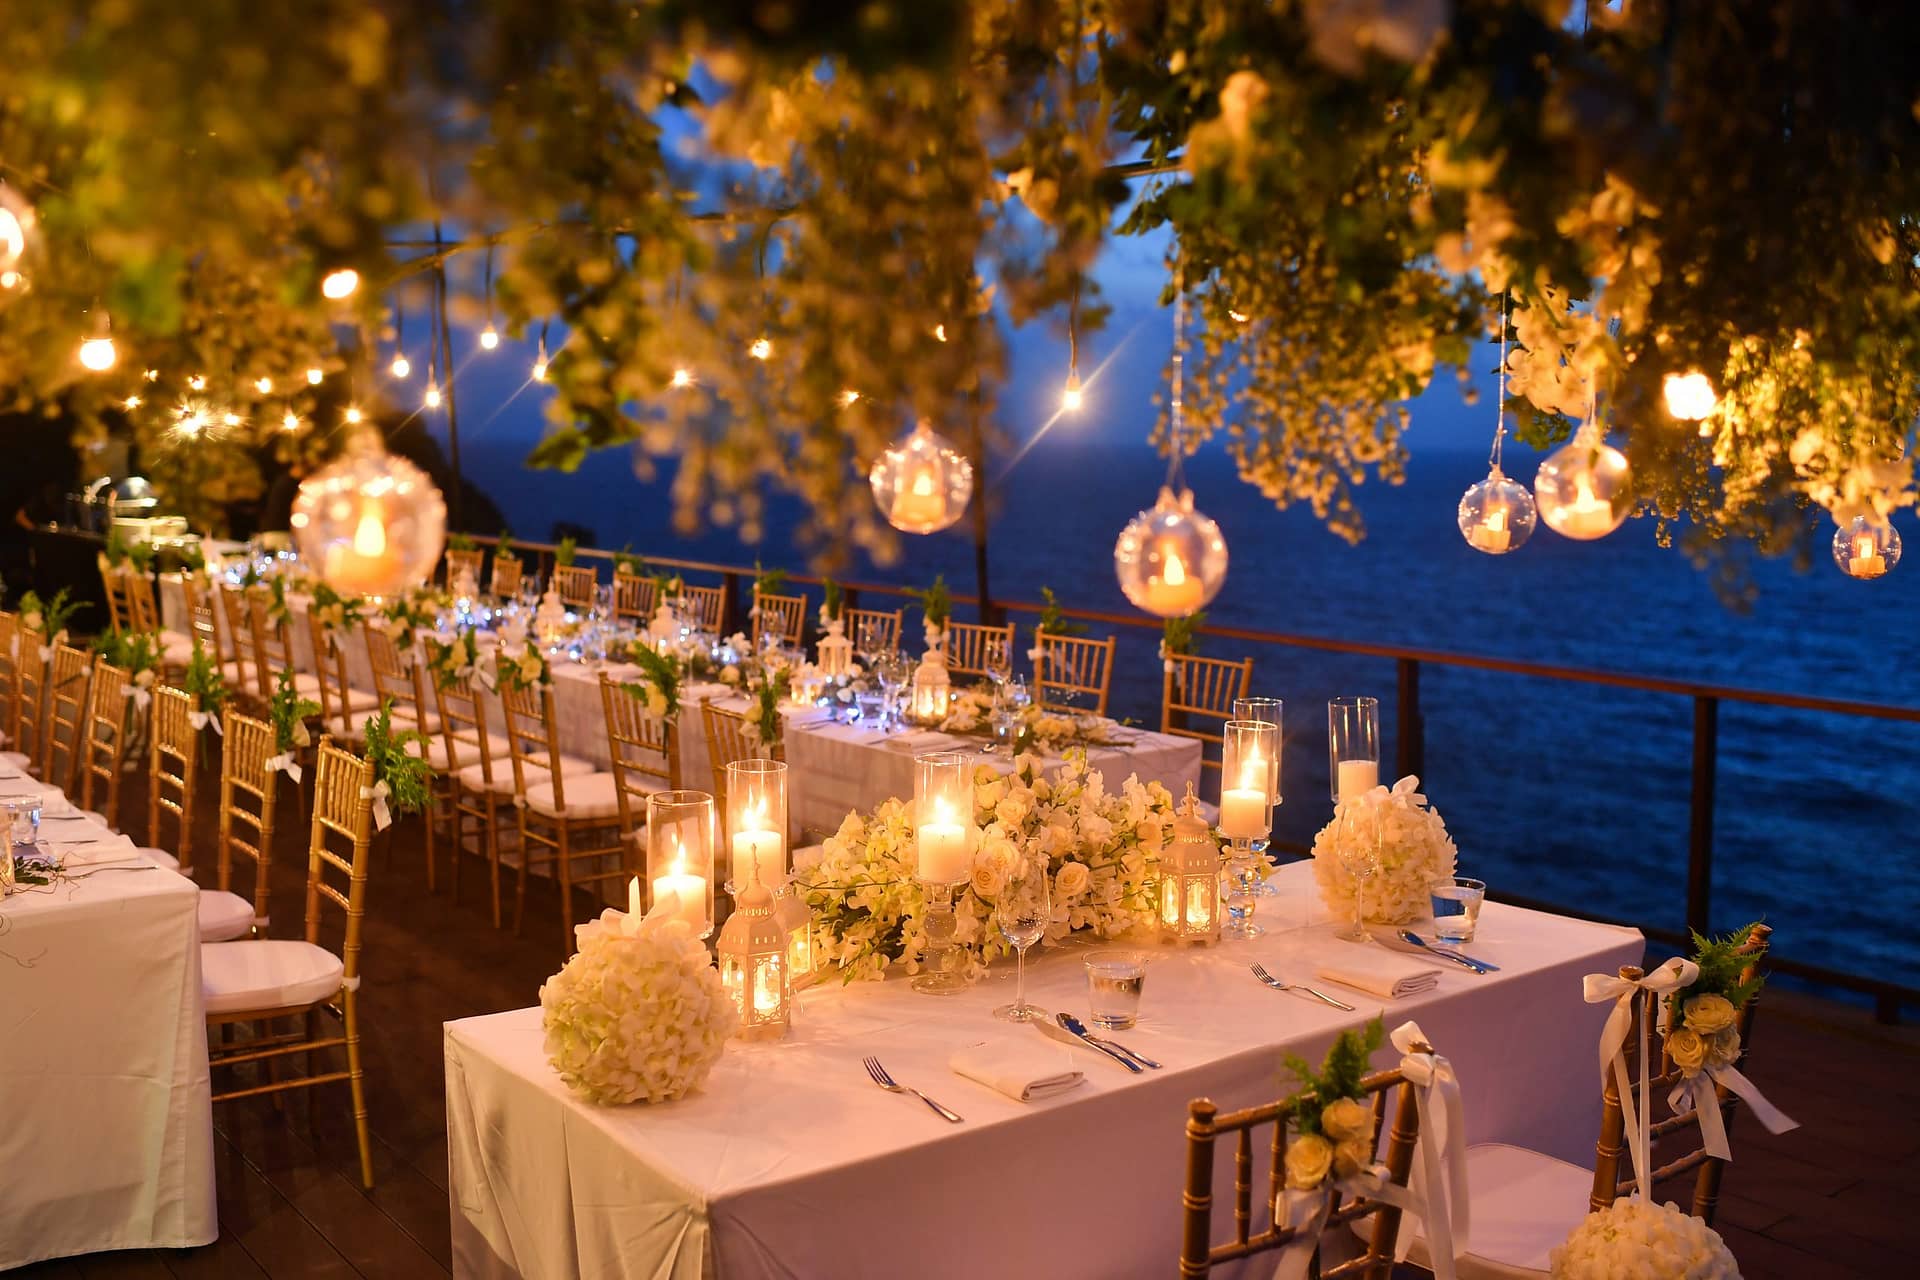 28 of the Best Wedding Venues Across the World According to These